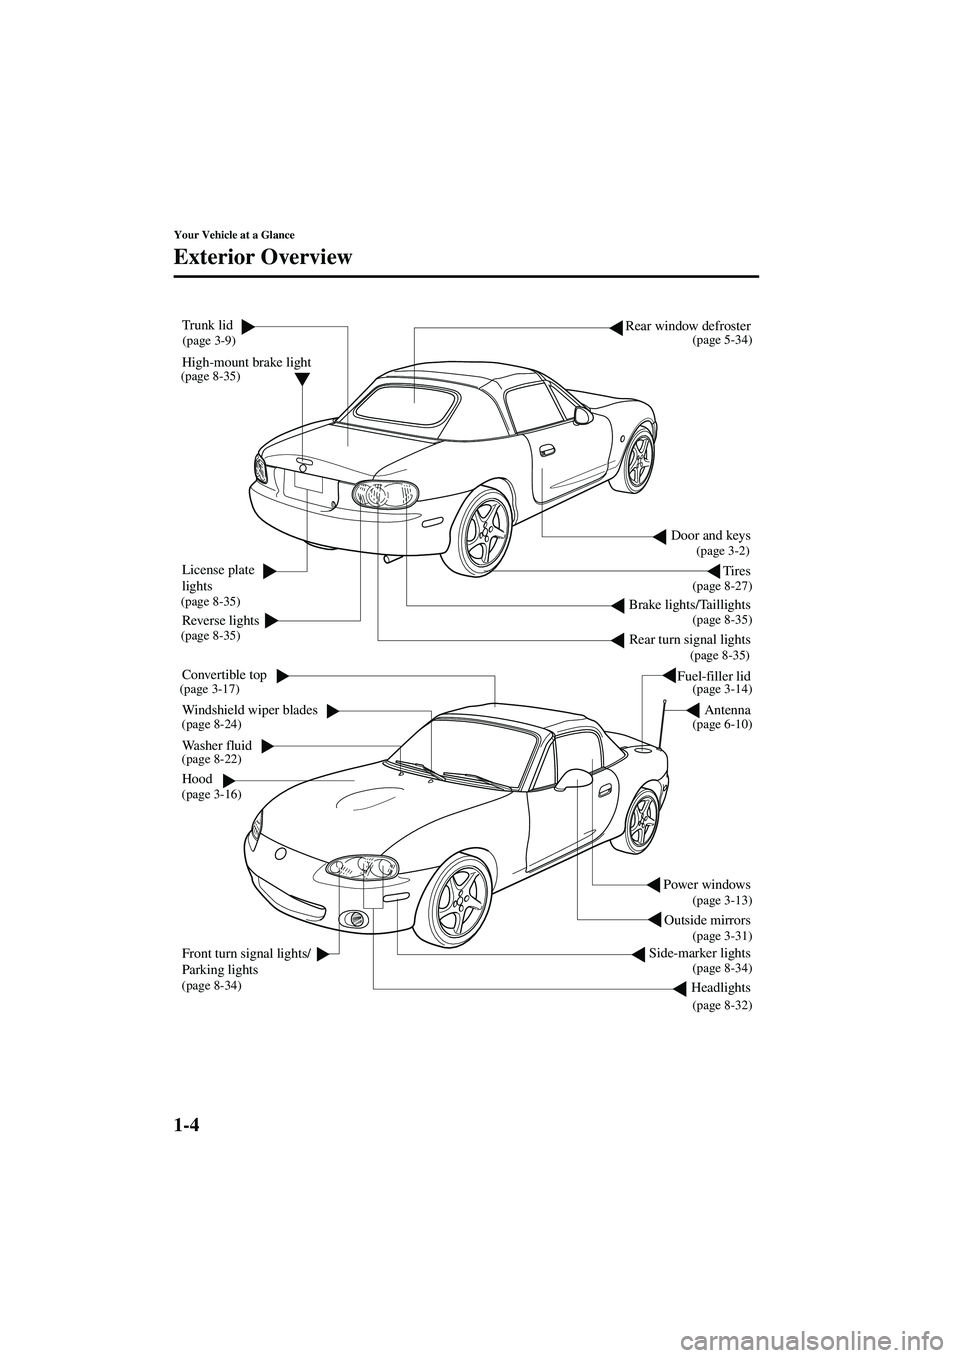 MAZDA MODEL MX-5 MIATA 2003  Owners Manual 1-4
Your Vehicle at a Glance
Form No. 8R09-EA-02G
Exterior Overview
Door and keys
Outside mirrors
Side-marker lights
Headlights
Fuel-filler lid
Tires
Windshield wiper blades
Washer fluid
Hood
Front tu